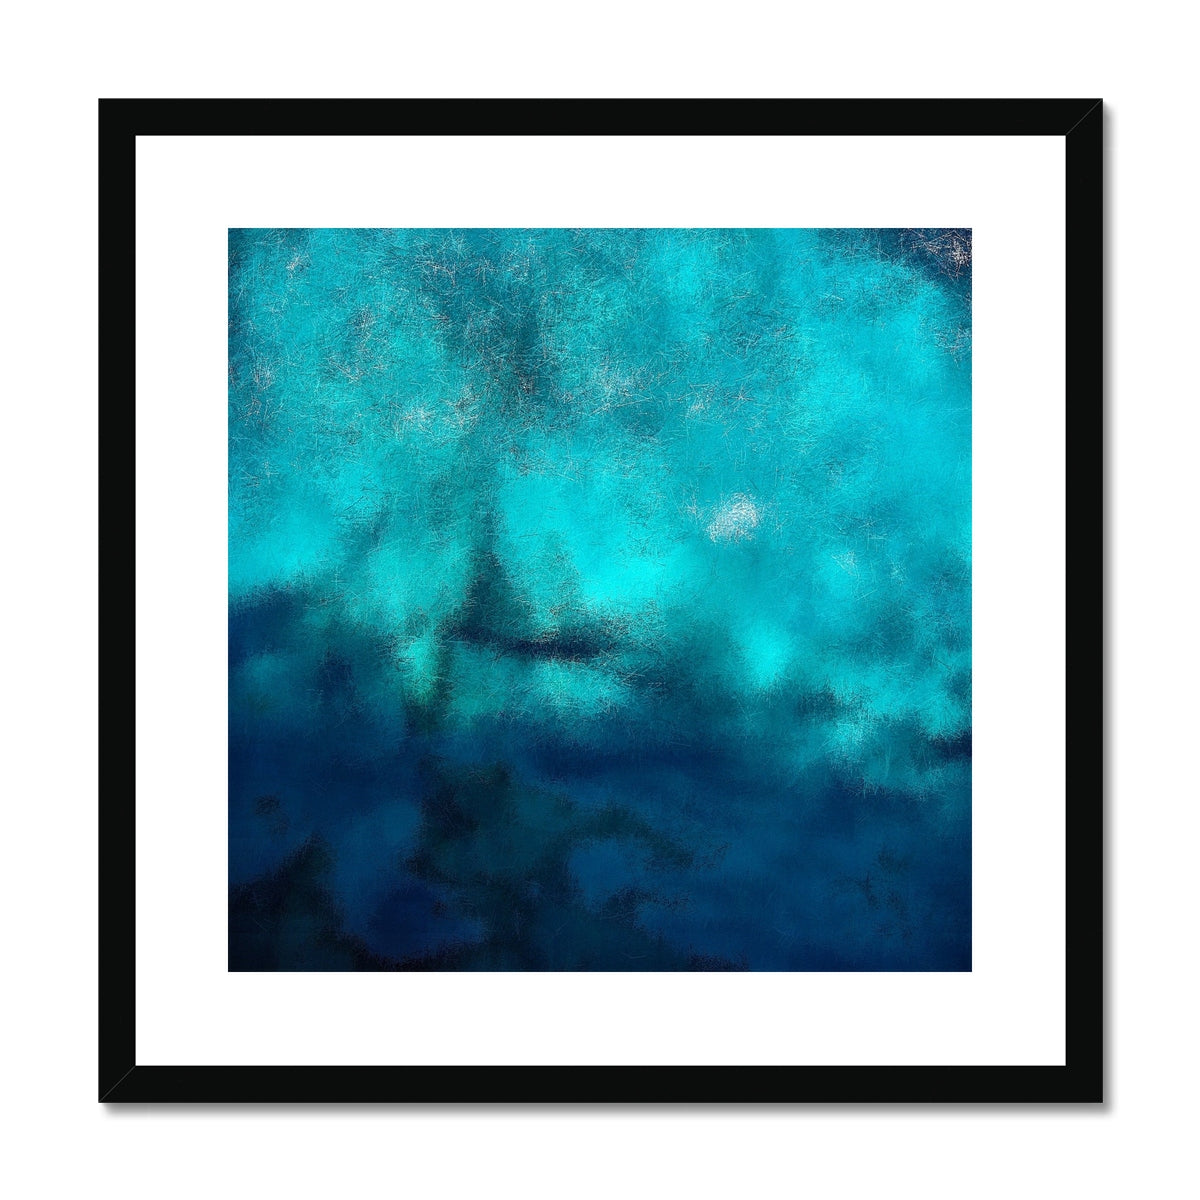 Diving Off Kos Greece Painting | Framed & Mounted Prints From Scotland-Framed & Mounted Prints-World Art Gallery-20"x20"-Black Frame-Paintings, Prints, Homeware, Art Gifts From Scotland By Scottish Artist Kevin Hunter